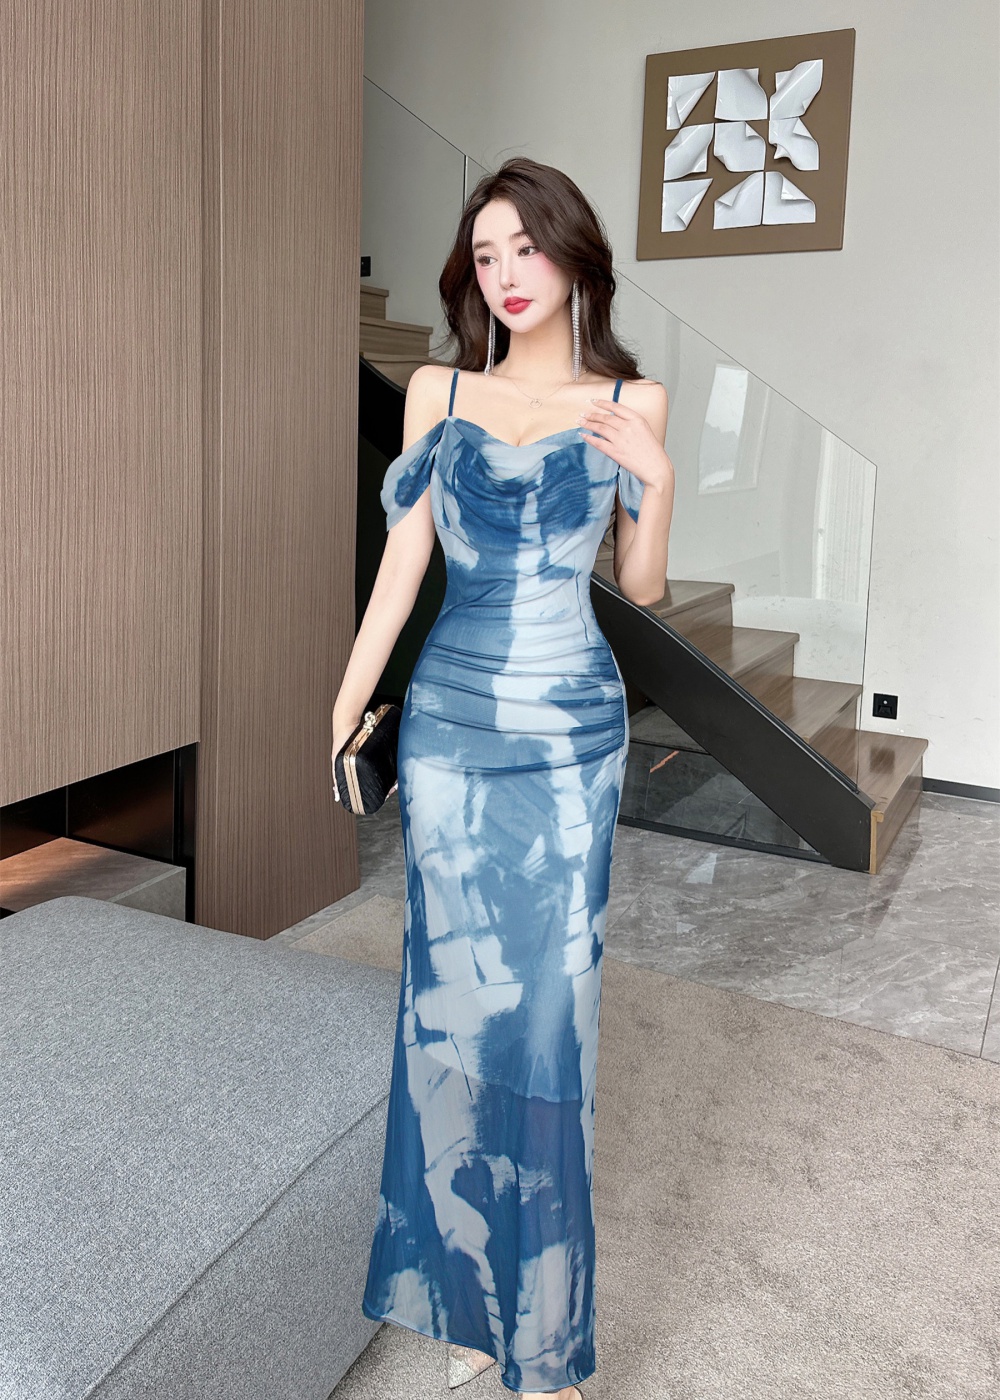 Sling painting long dress package hip dress for women